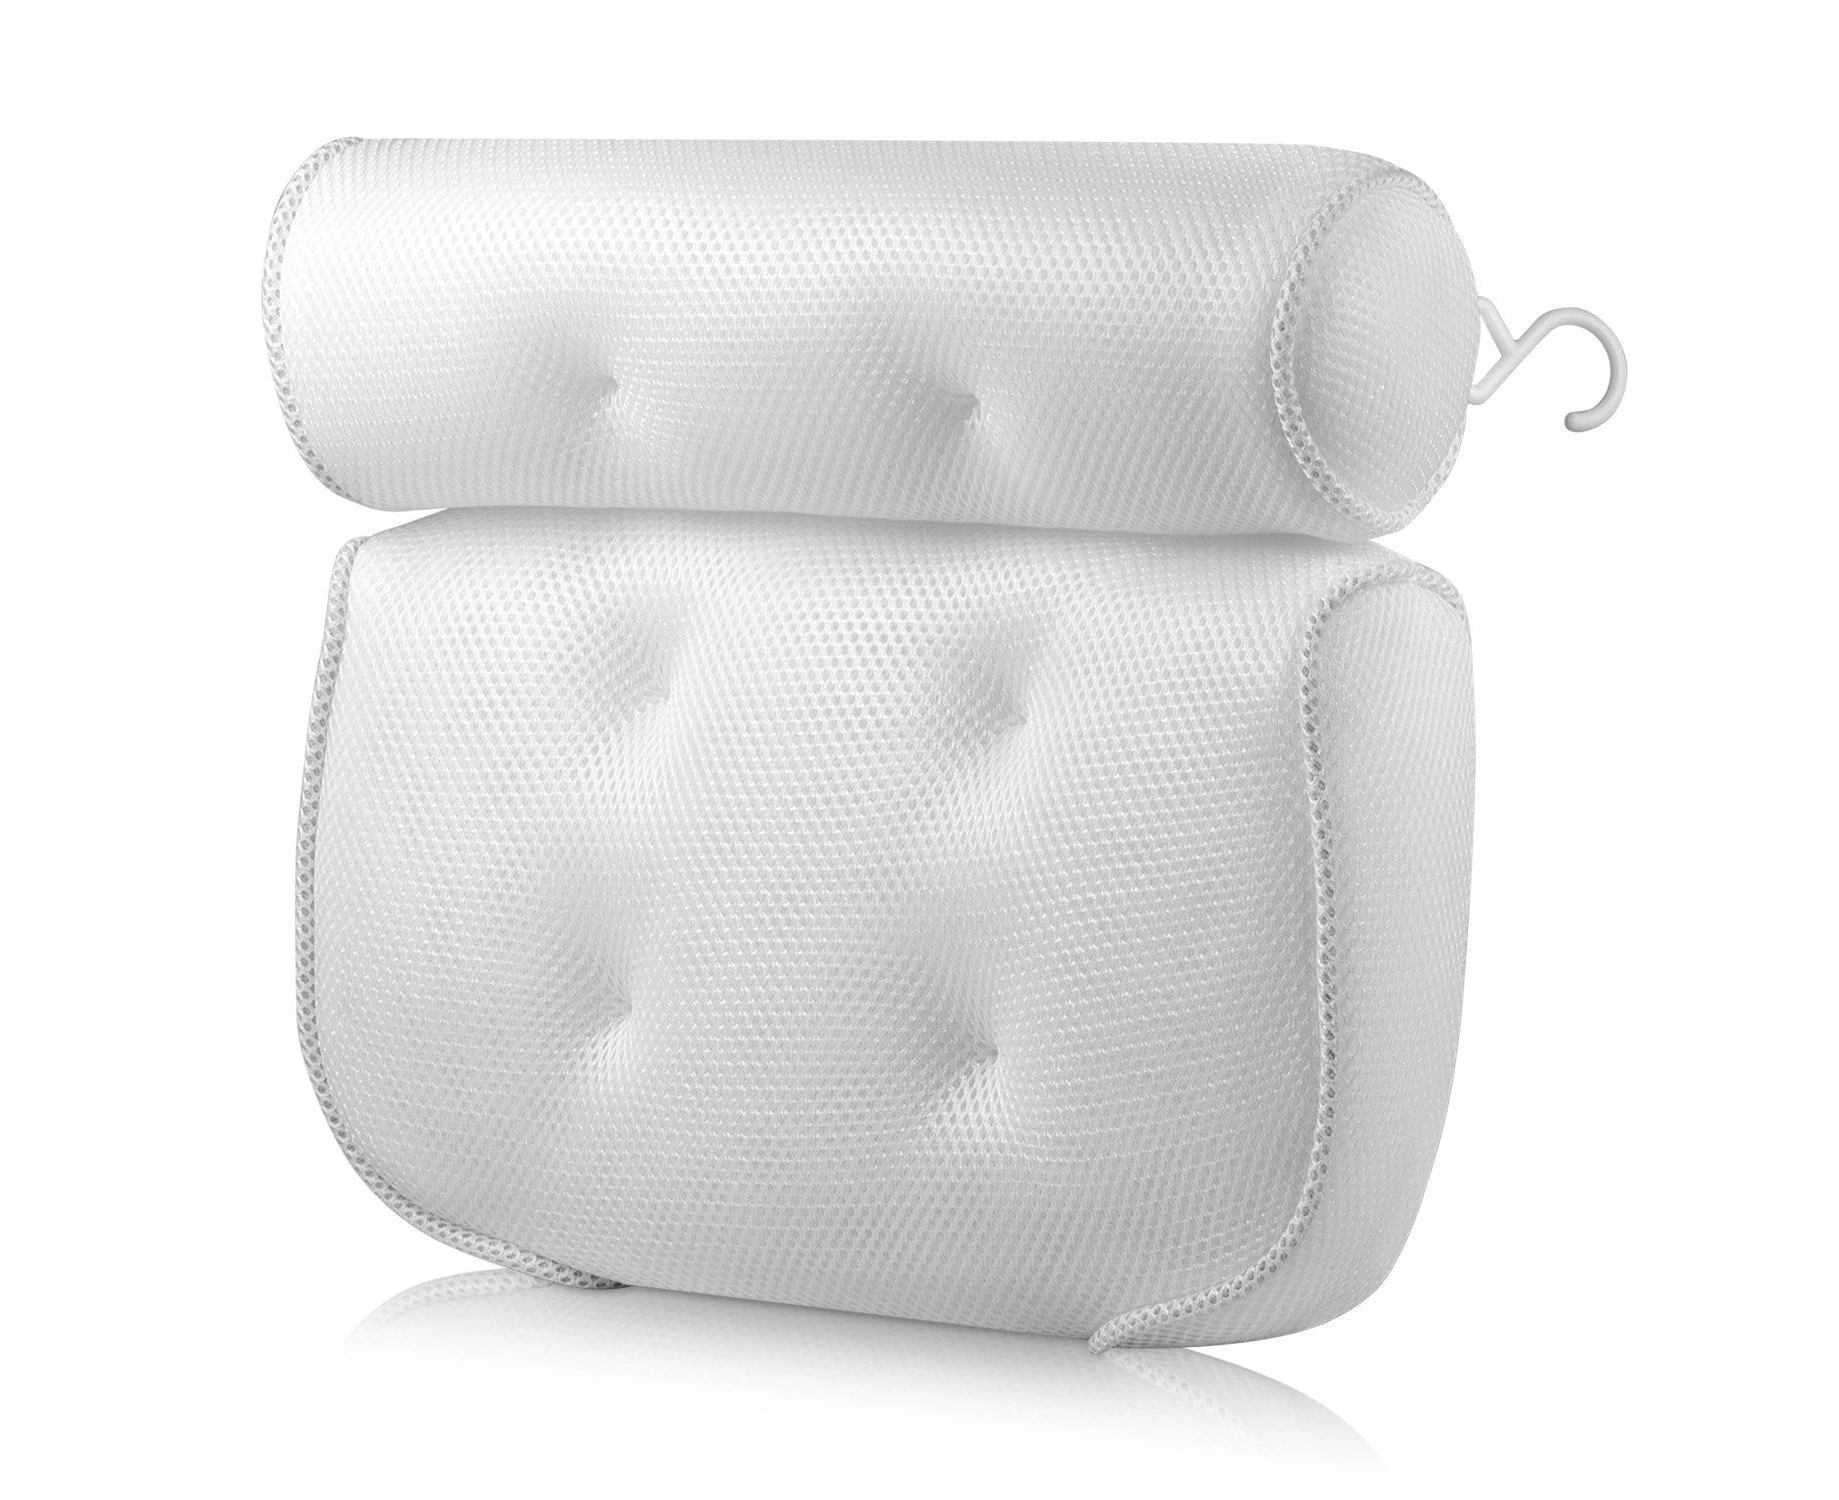 3D Mesh Bath Pillow Spa Pillow for Hot Tub Bathtub Neck Relax with